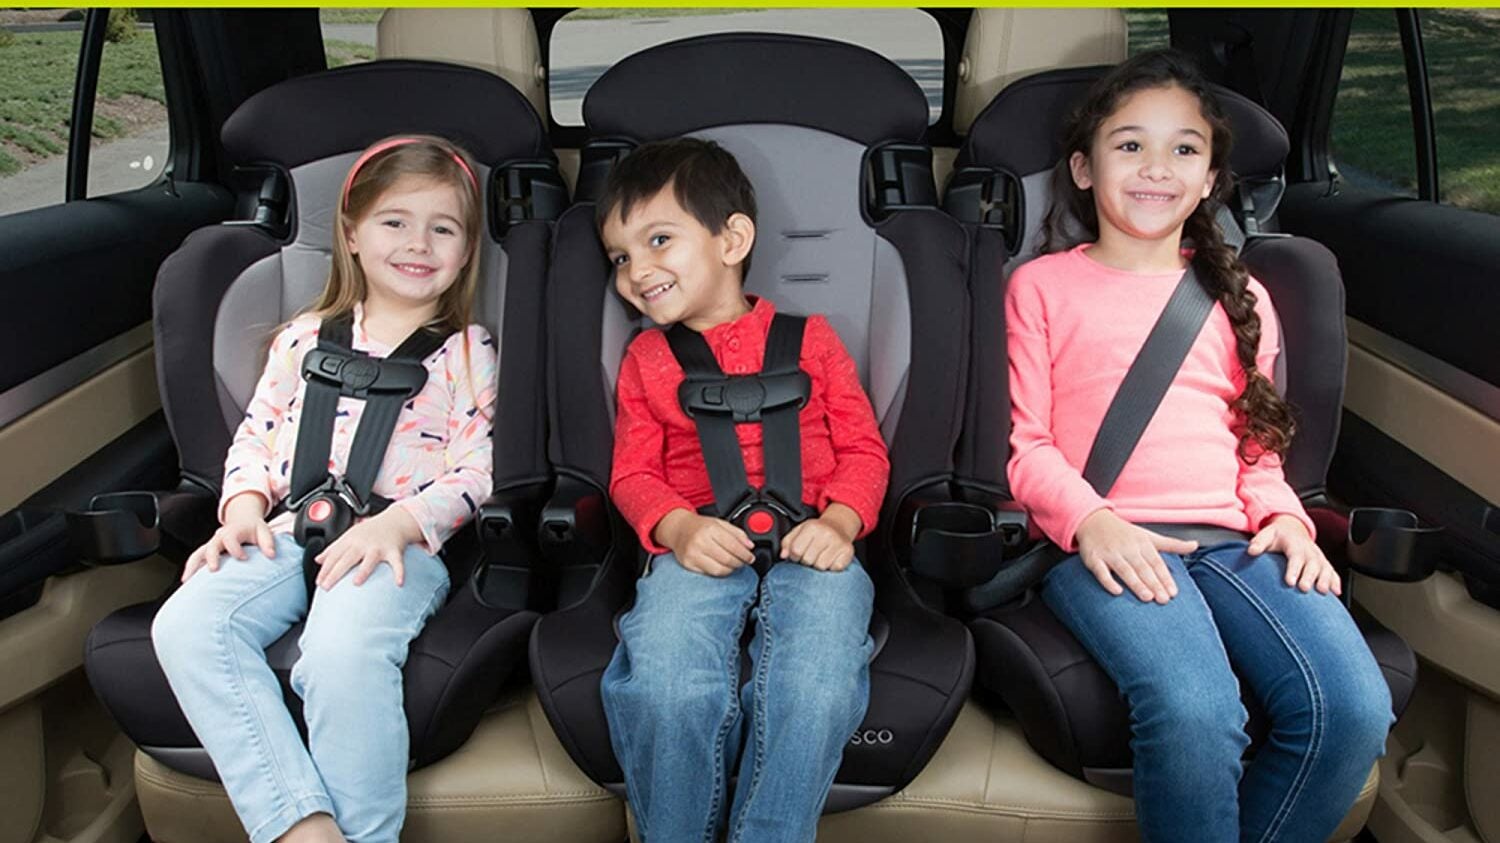 Best Car Seats For 4 Year Olds Review, What Type Of Car Seat Is Needed For A 4 Year Old